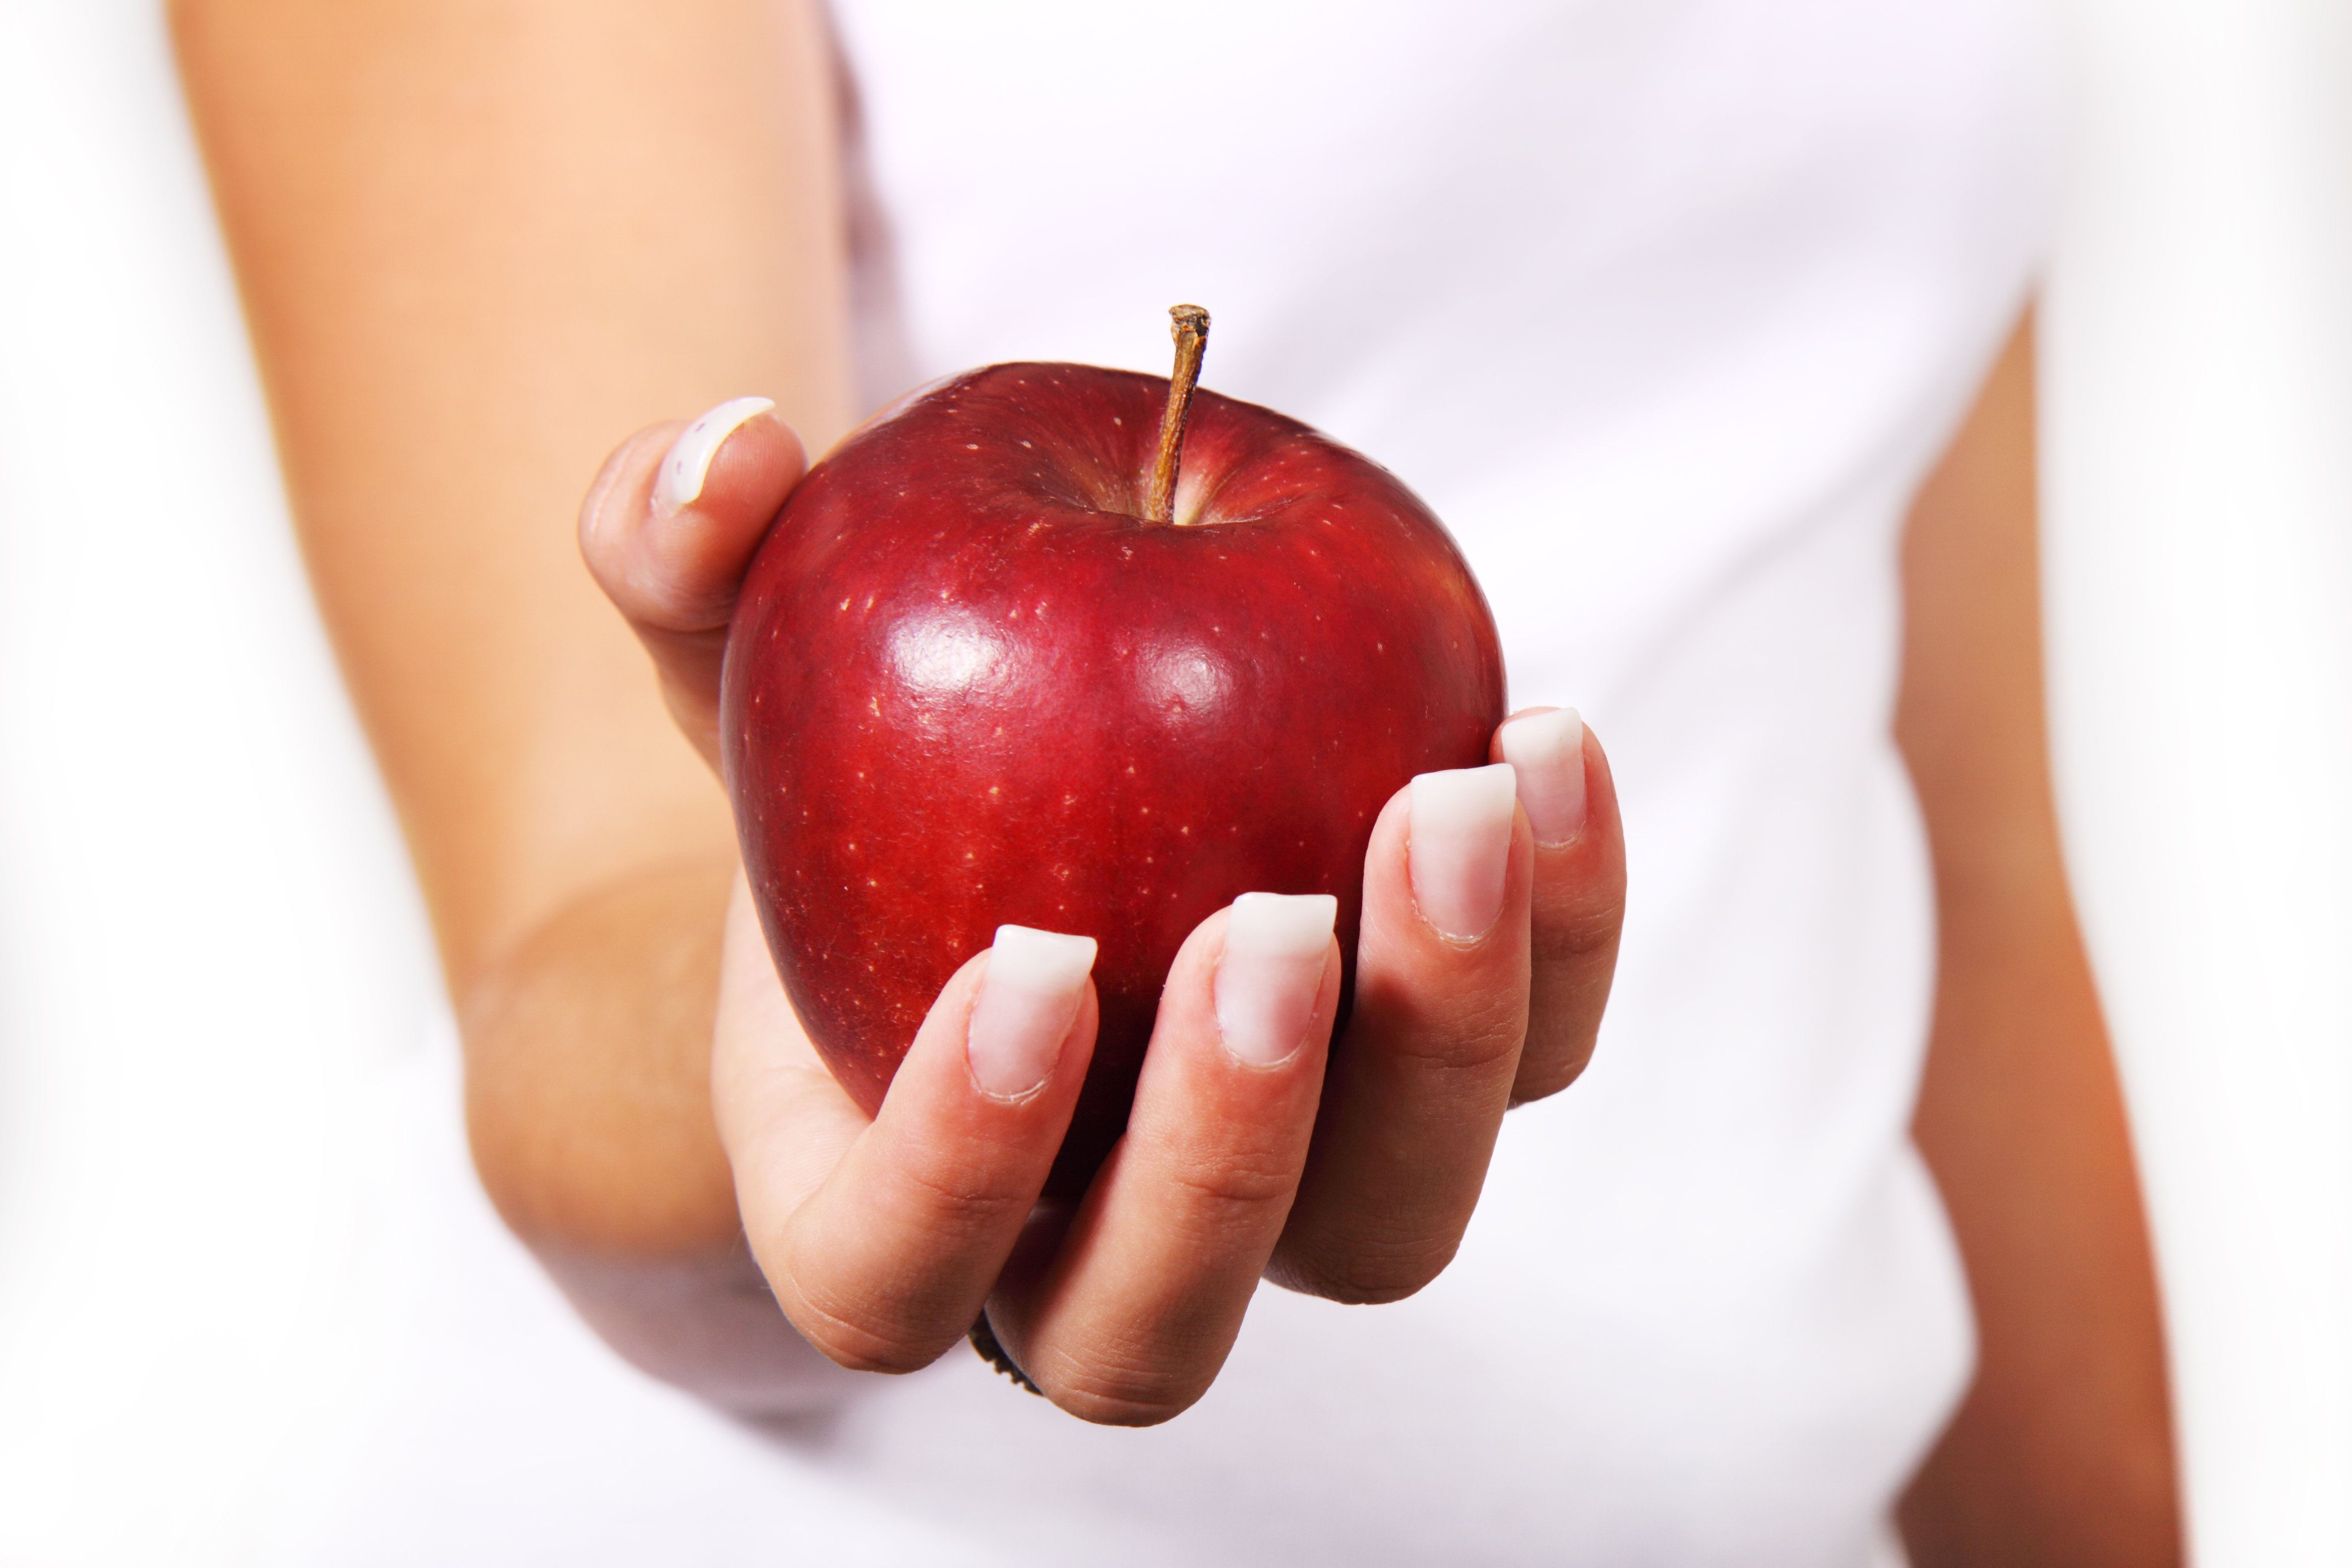 A red apple held in a woman's hand with her arm outstretched as if offering it to the viewer.